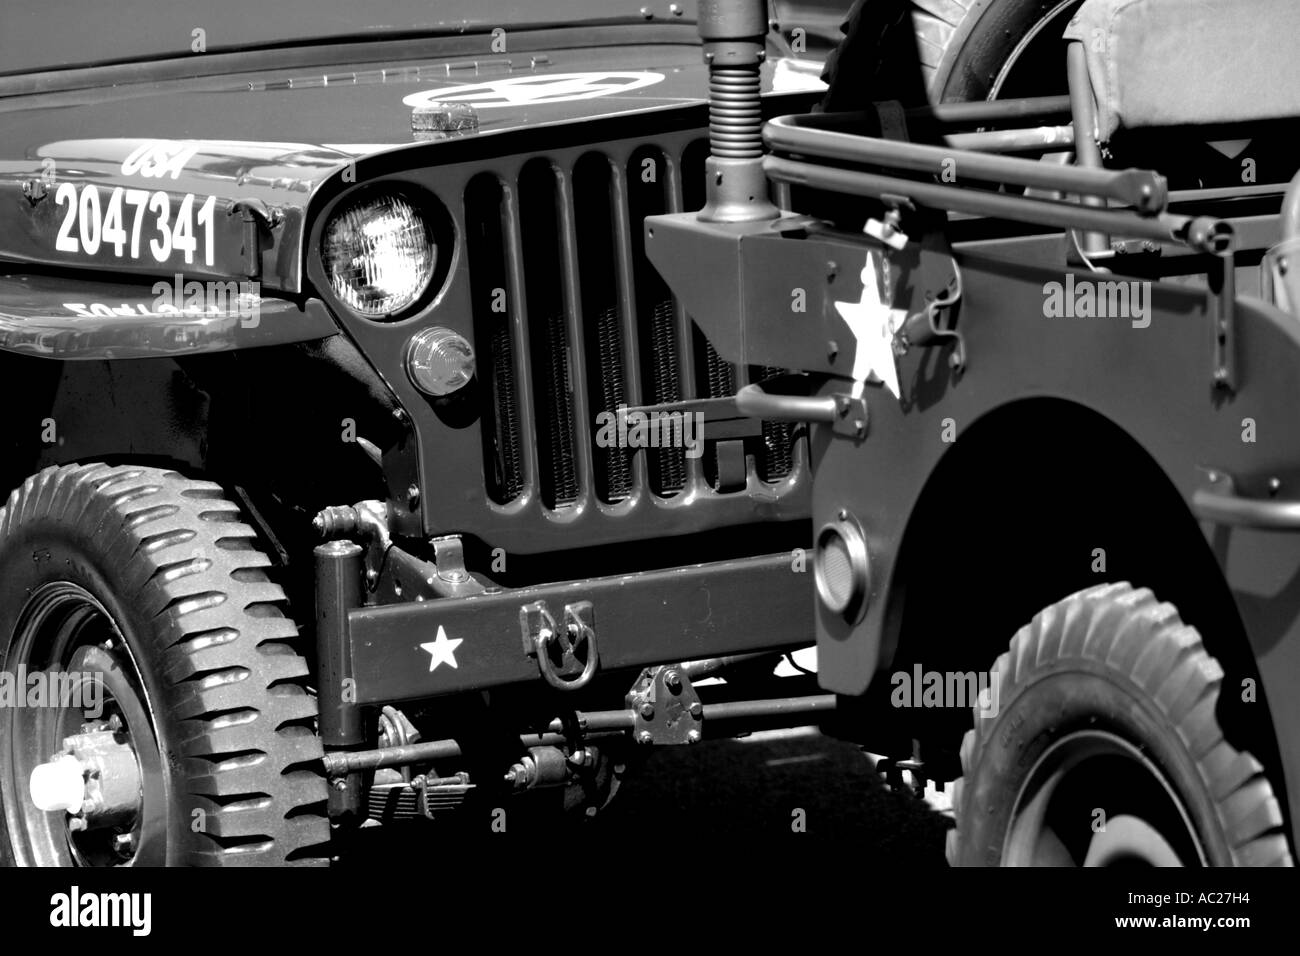 TWO RESTORED AMERICAN ARMY JEEPS HORIZONTAL BAPDB7696 BLACK AND WHITE Stock Photo